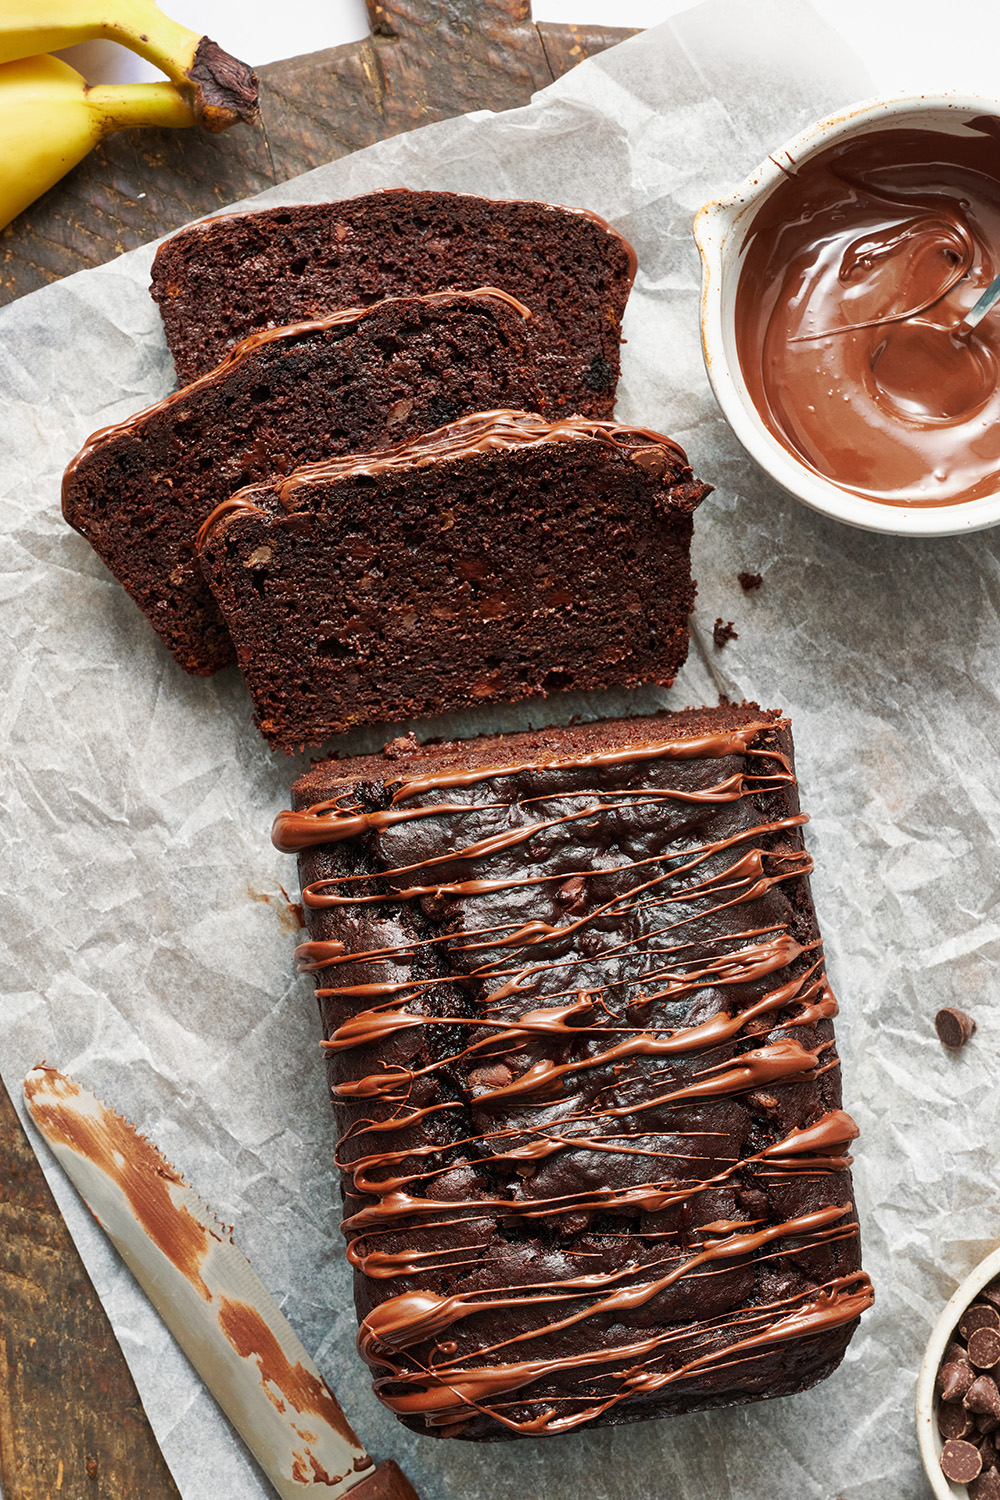 Chocolate-Drizzled Loaf of Chocolate Banana Bread